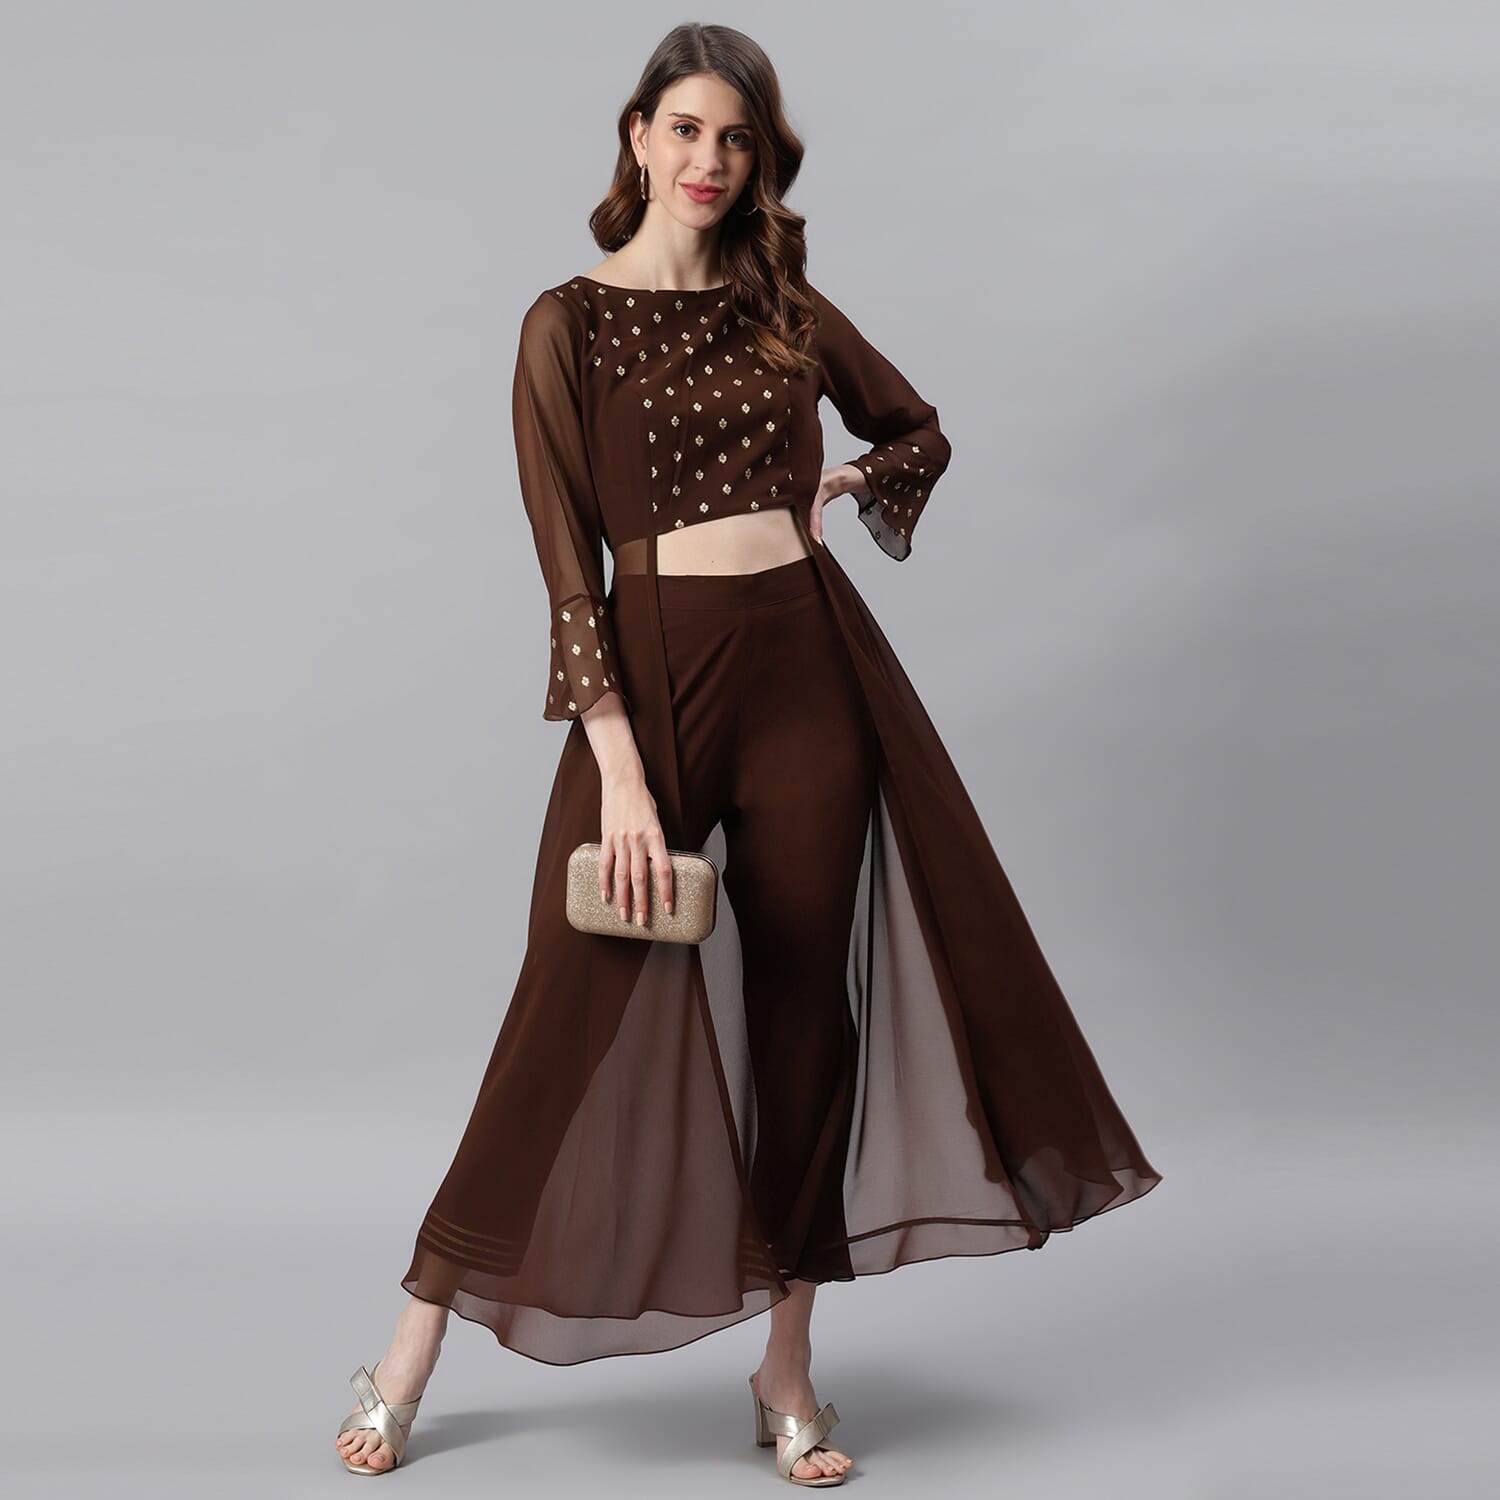 Janasya Indian Round Neck 3/4 Sleeve Ethnic Motifs Brown Georgette Top With Pant For Women - image 1 of 8